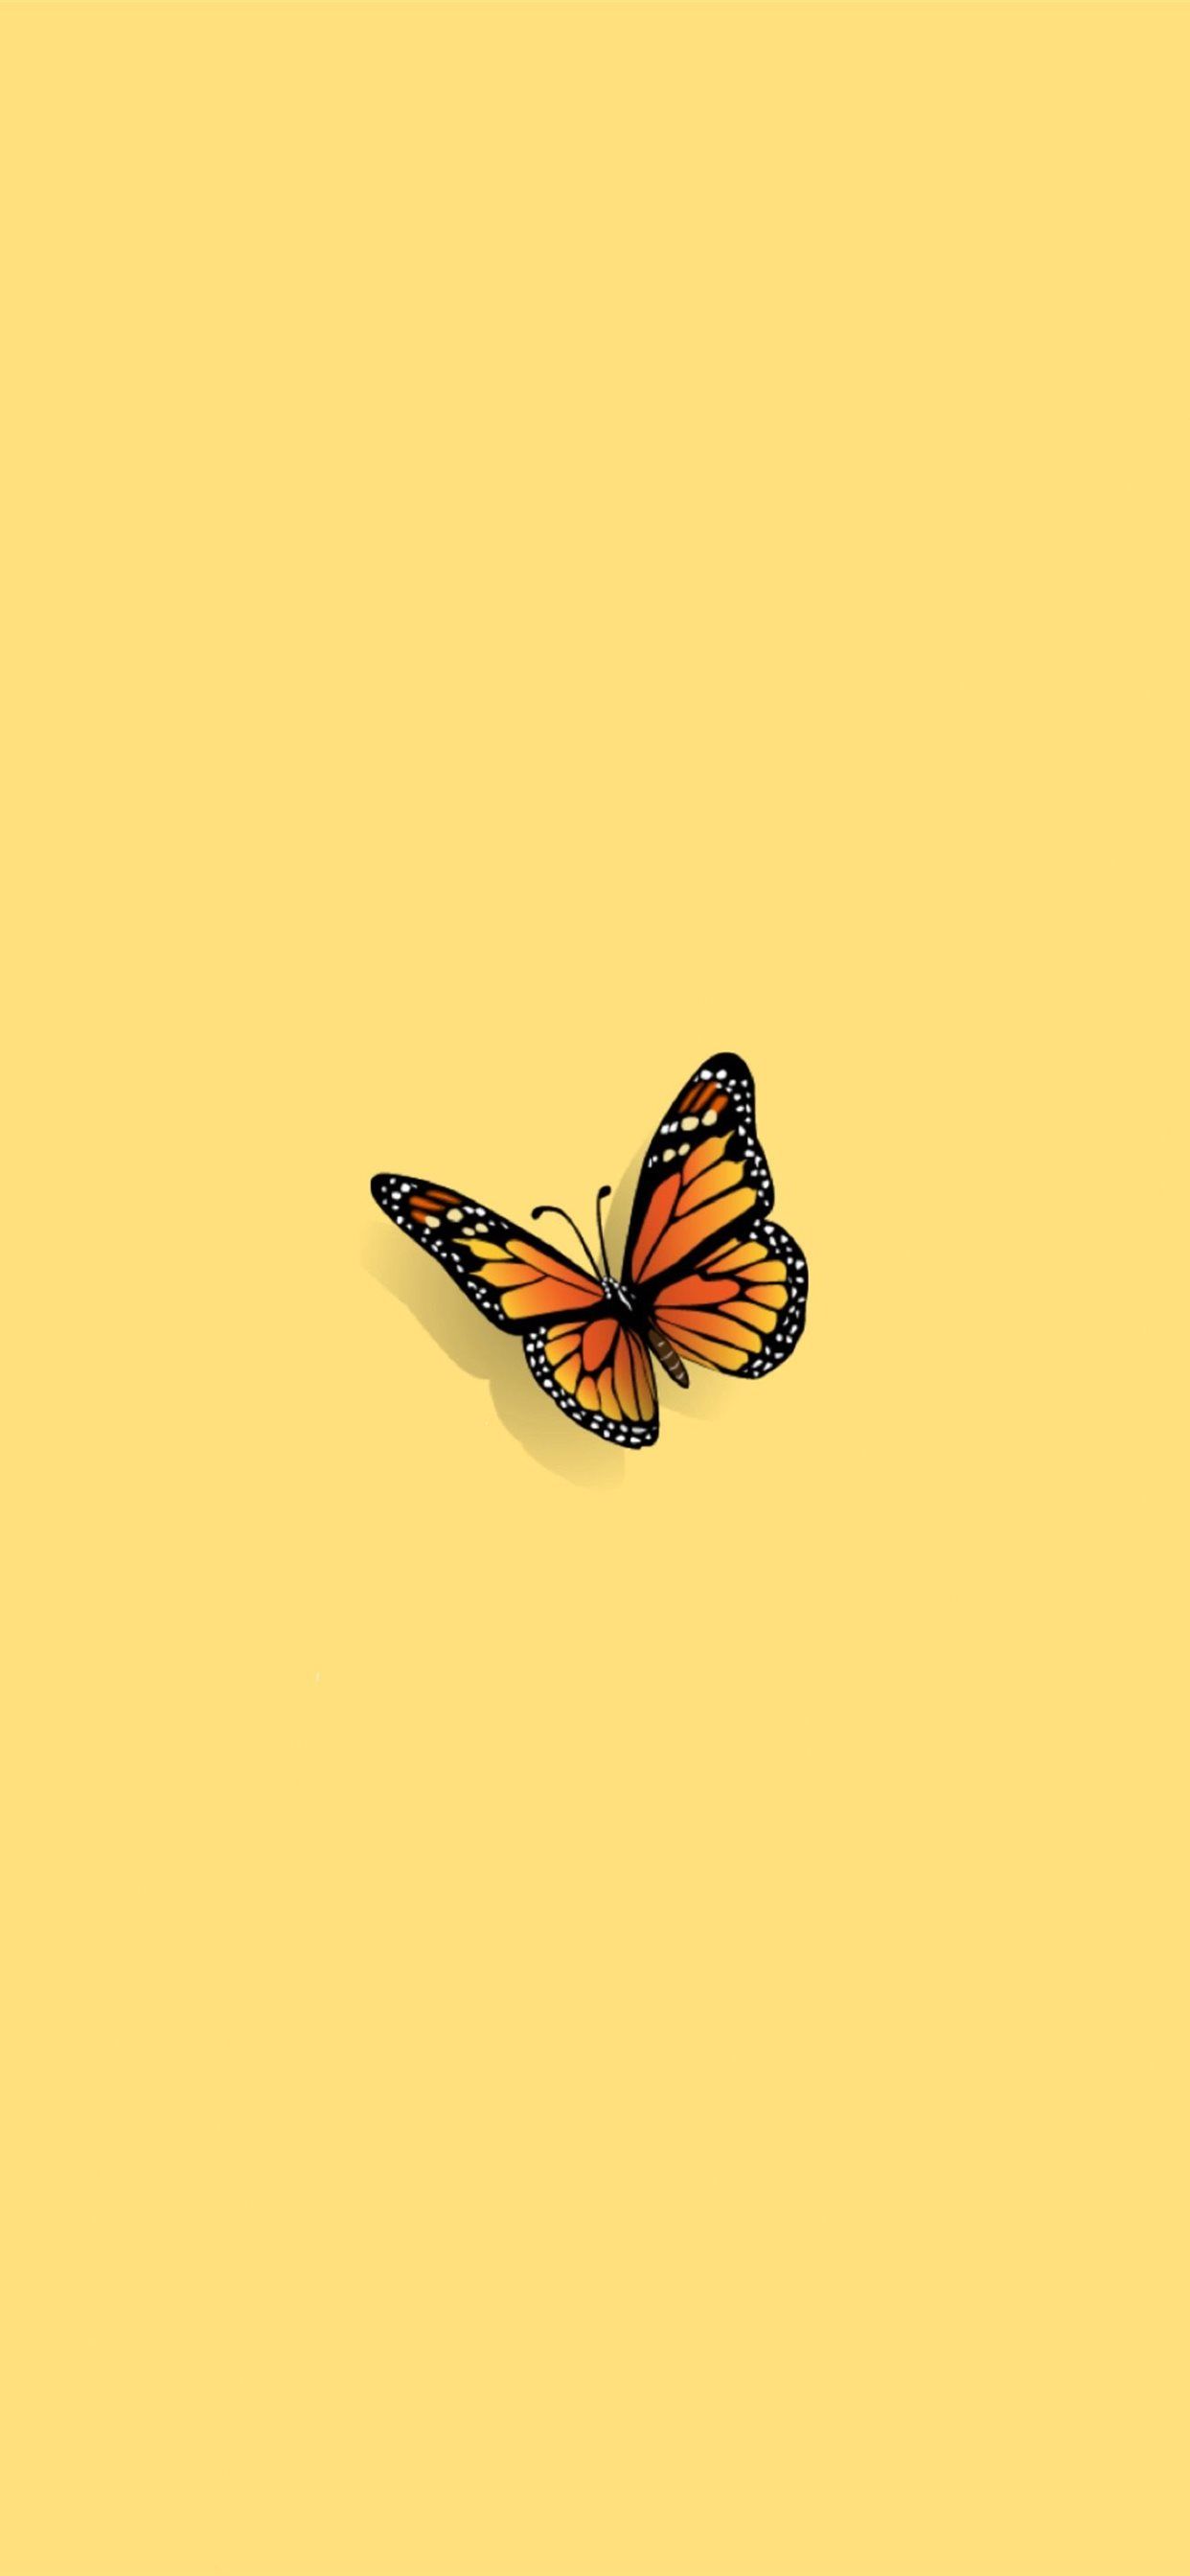 Butterfly iPhone X Wallpapers Free Download